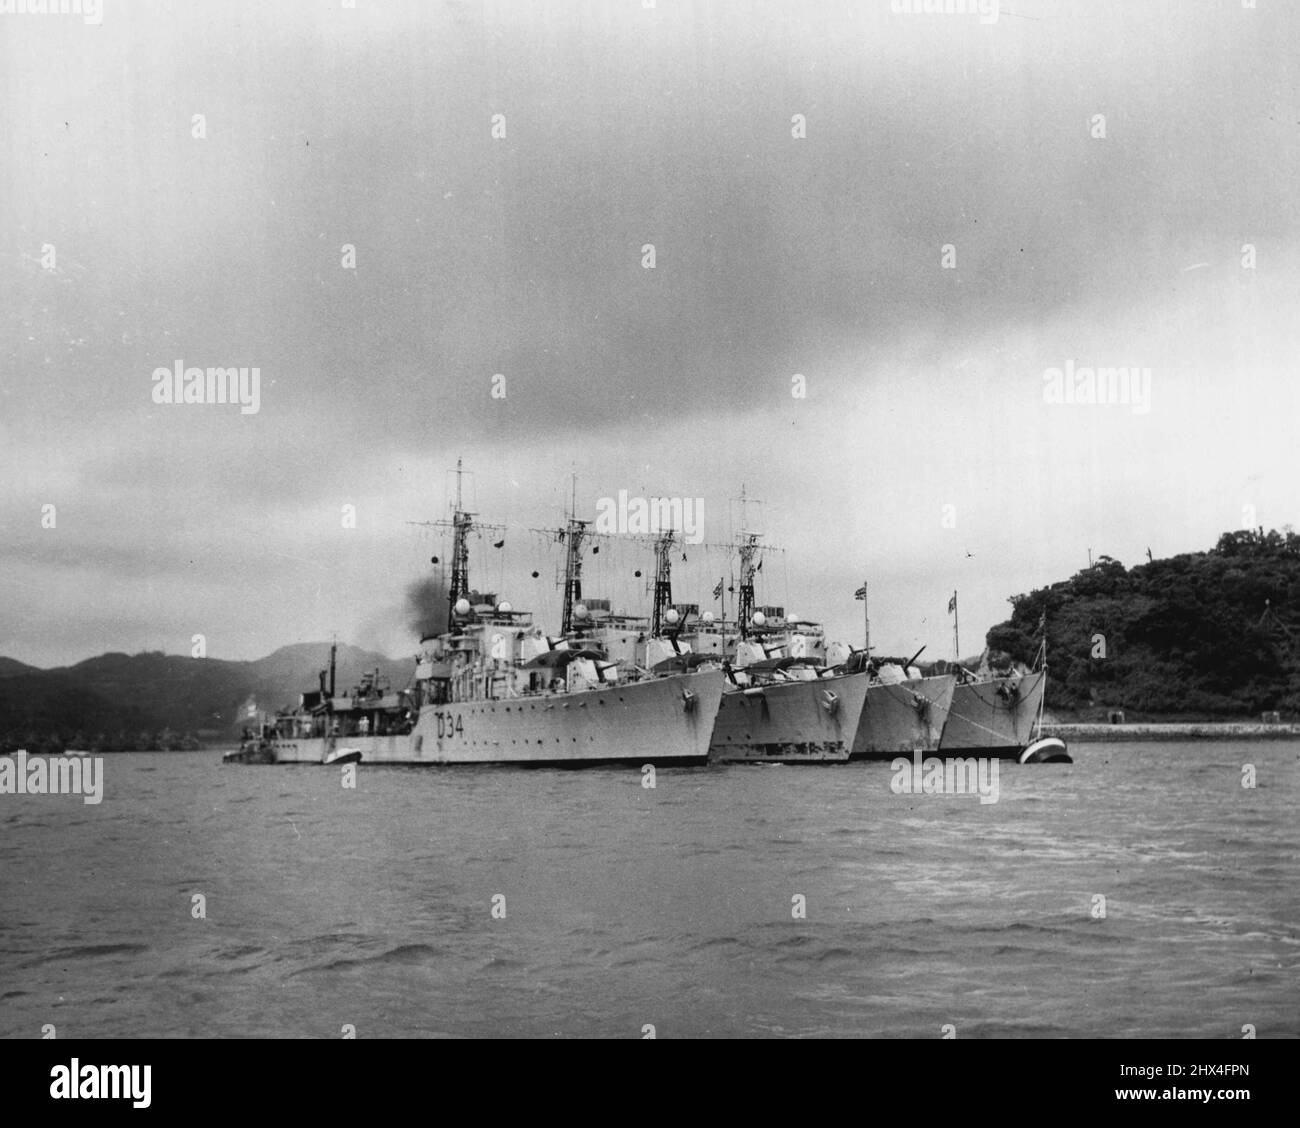 Royal Navy Destroyers Take A Breather - His Majesty's Ships COCKDE, CHARITY, CONSTORT and COSSACK take a well earned breather from Korean War duties at U.S. Fleet Activities Yokosuka. The DD's are commanded by Commander John T. Kimpton, RN; Commander John Henley, RN; Commander George B. Rowe, RN, and Capt. Varyl C. Begg, DSC, RN, respectively. Korean action of the vessels includes the invasion of Inchon, the bombardment of Wonsan, ingshore patrol off the east and wet coast and anti-submarine patrol in support of Royal Navy and United States Navy aircraft carriers. August 10, 1951. (Photo by Of Stock Photo